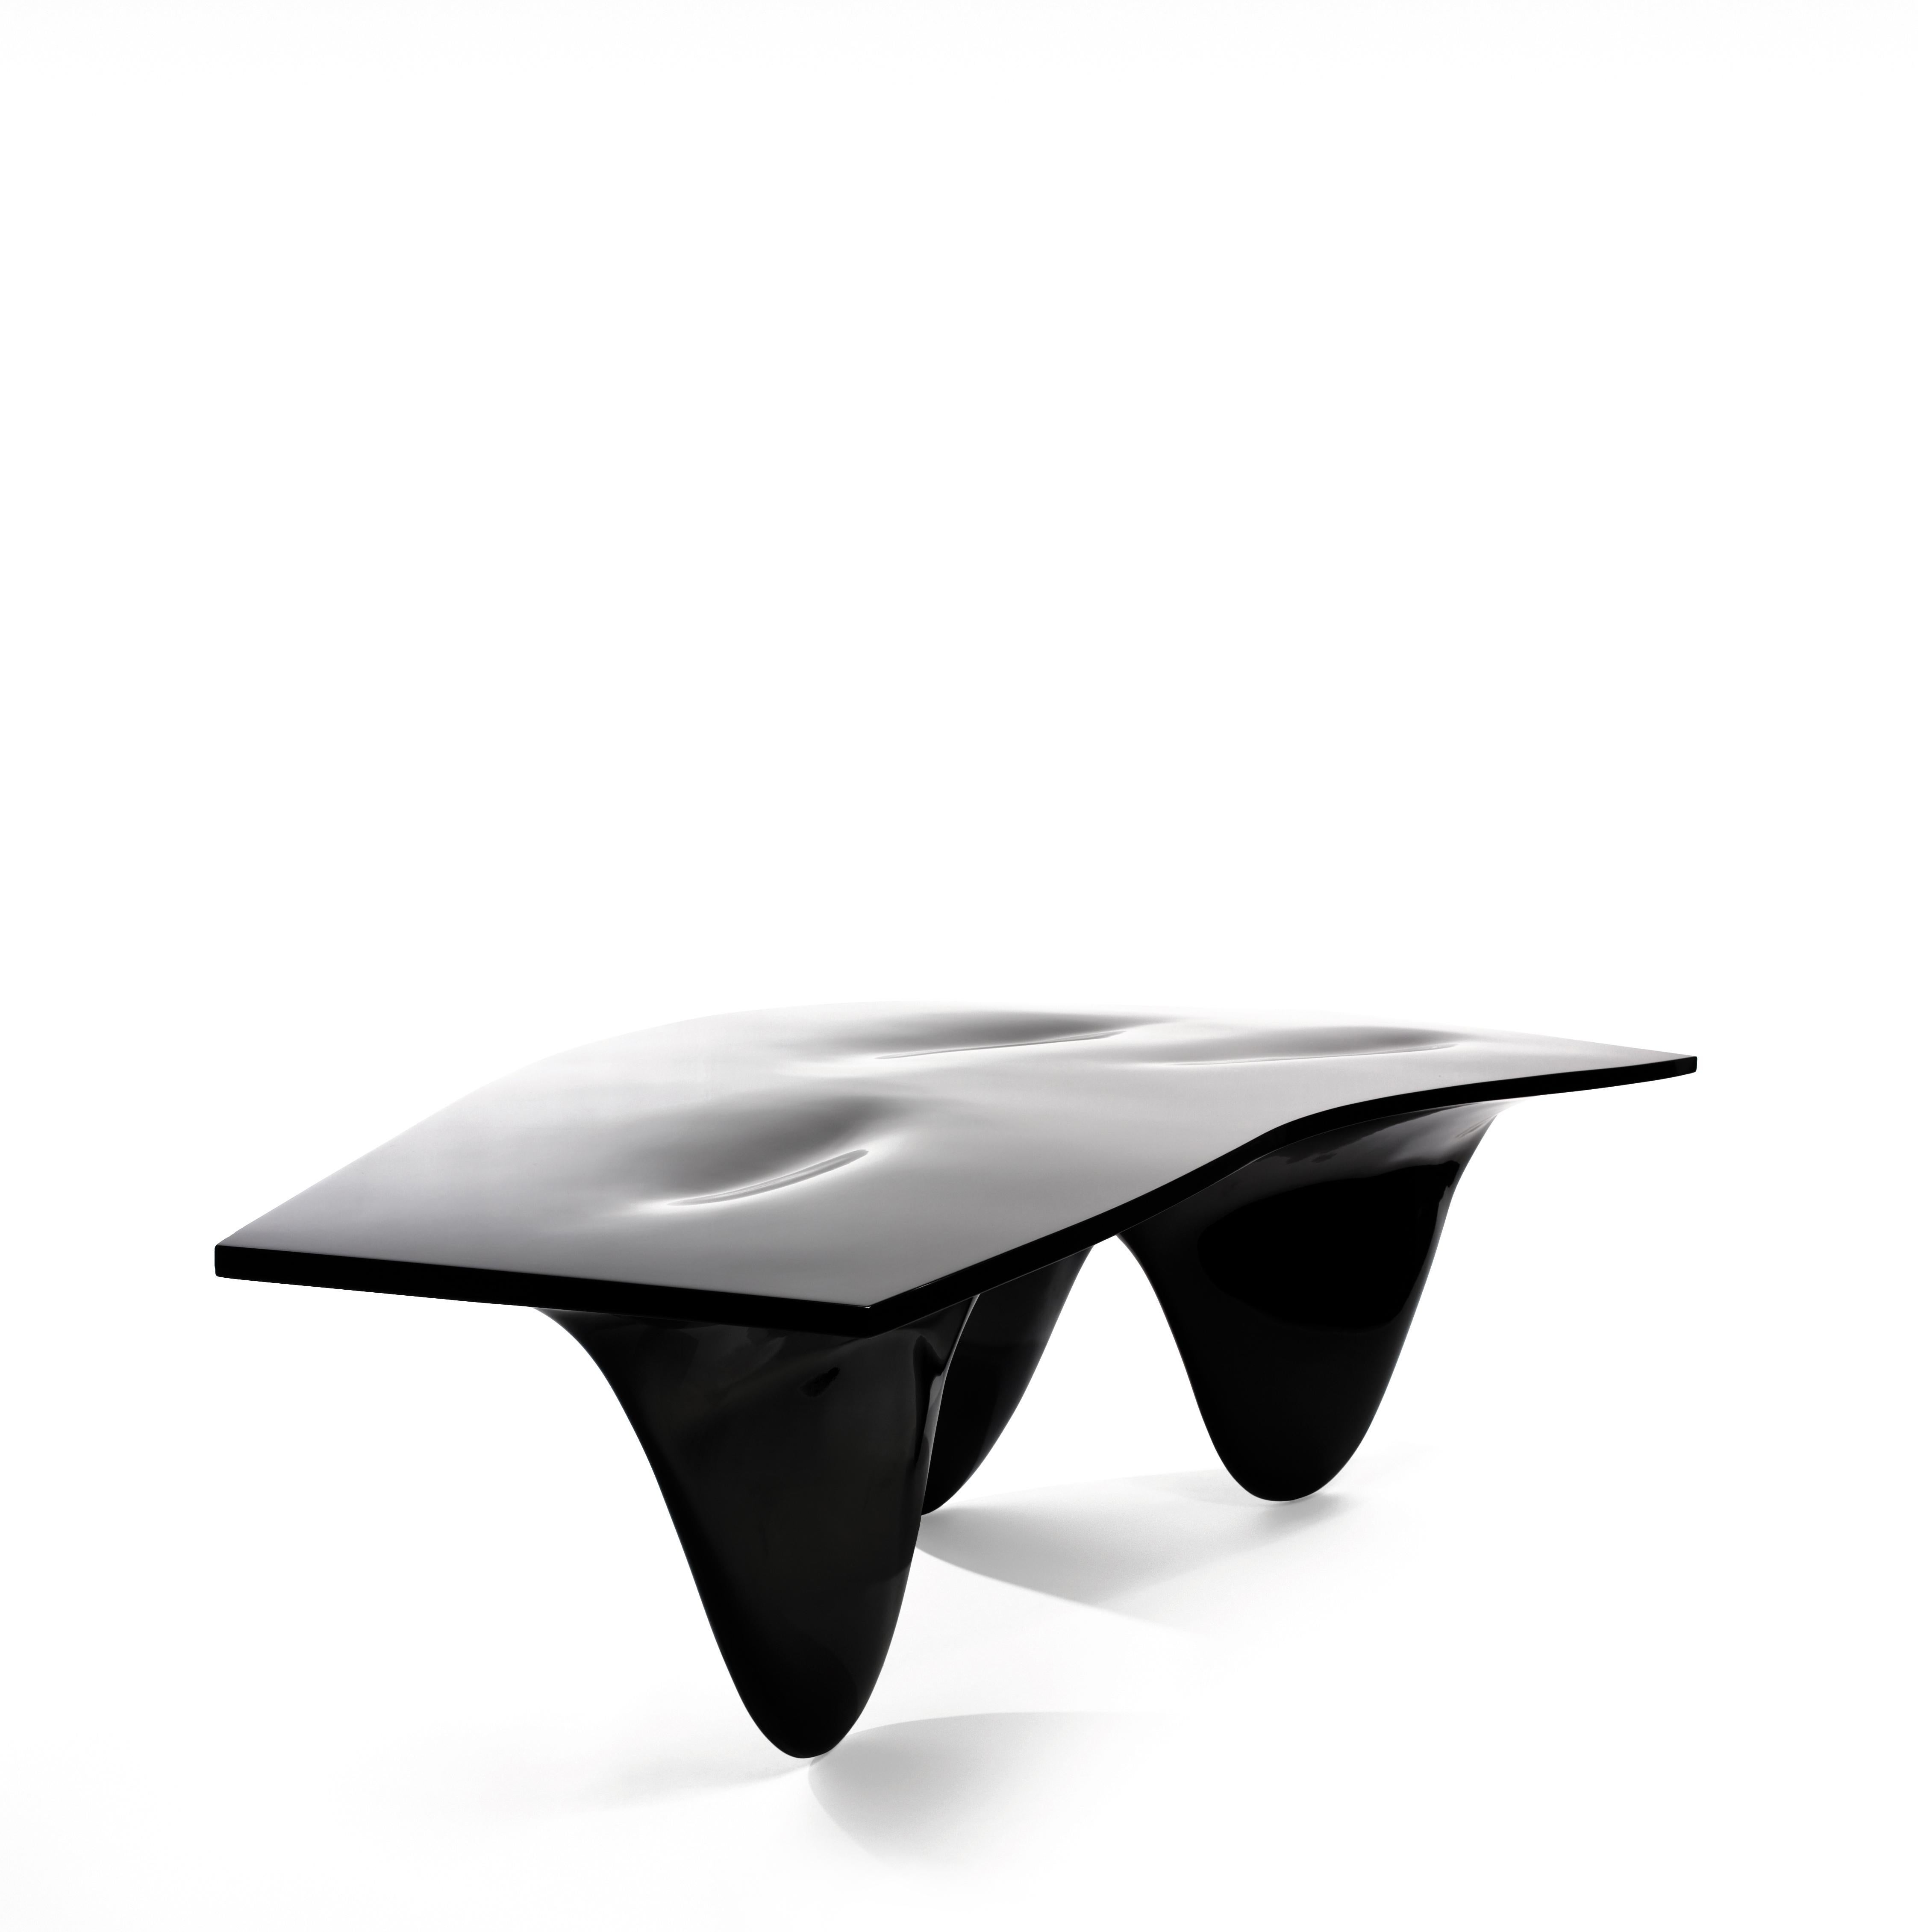 Zaha Hadid’s voluptuous Aqua table is an uninterrupted whole – a curious and curvaceous form that invites viewers to engage with it. Standing as an impressive centrepiece it delivers a stylish focal point in any space. The three fin-like legs of the